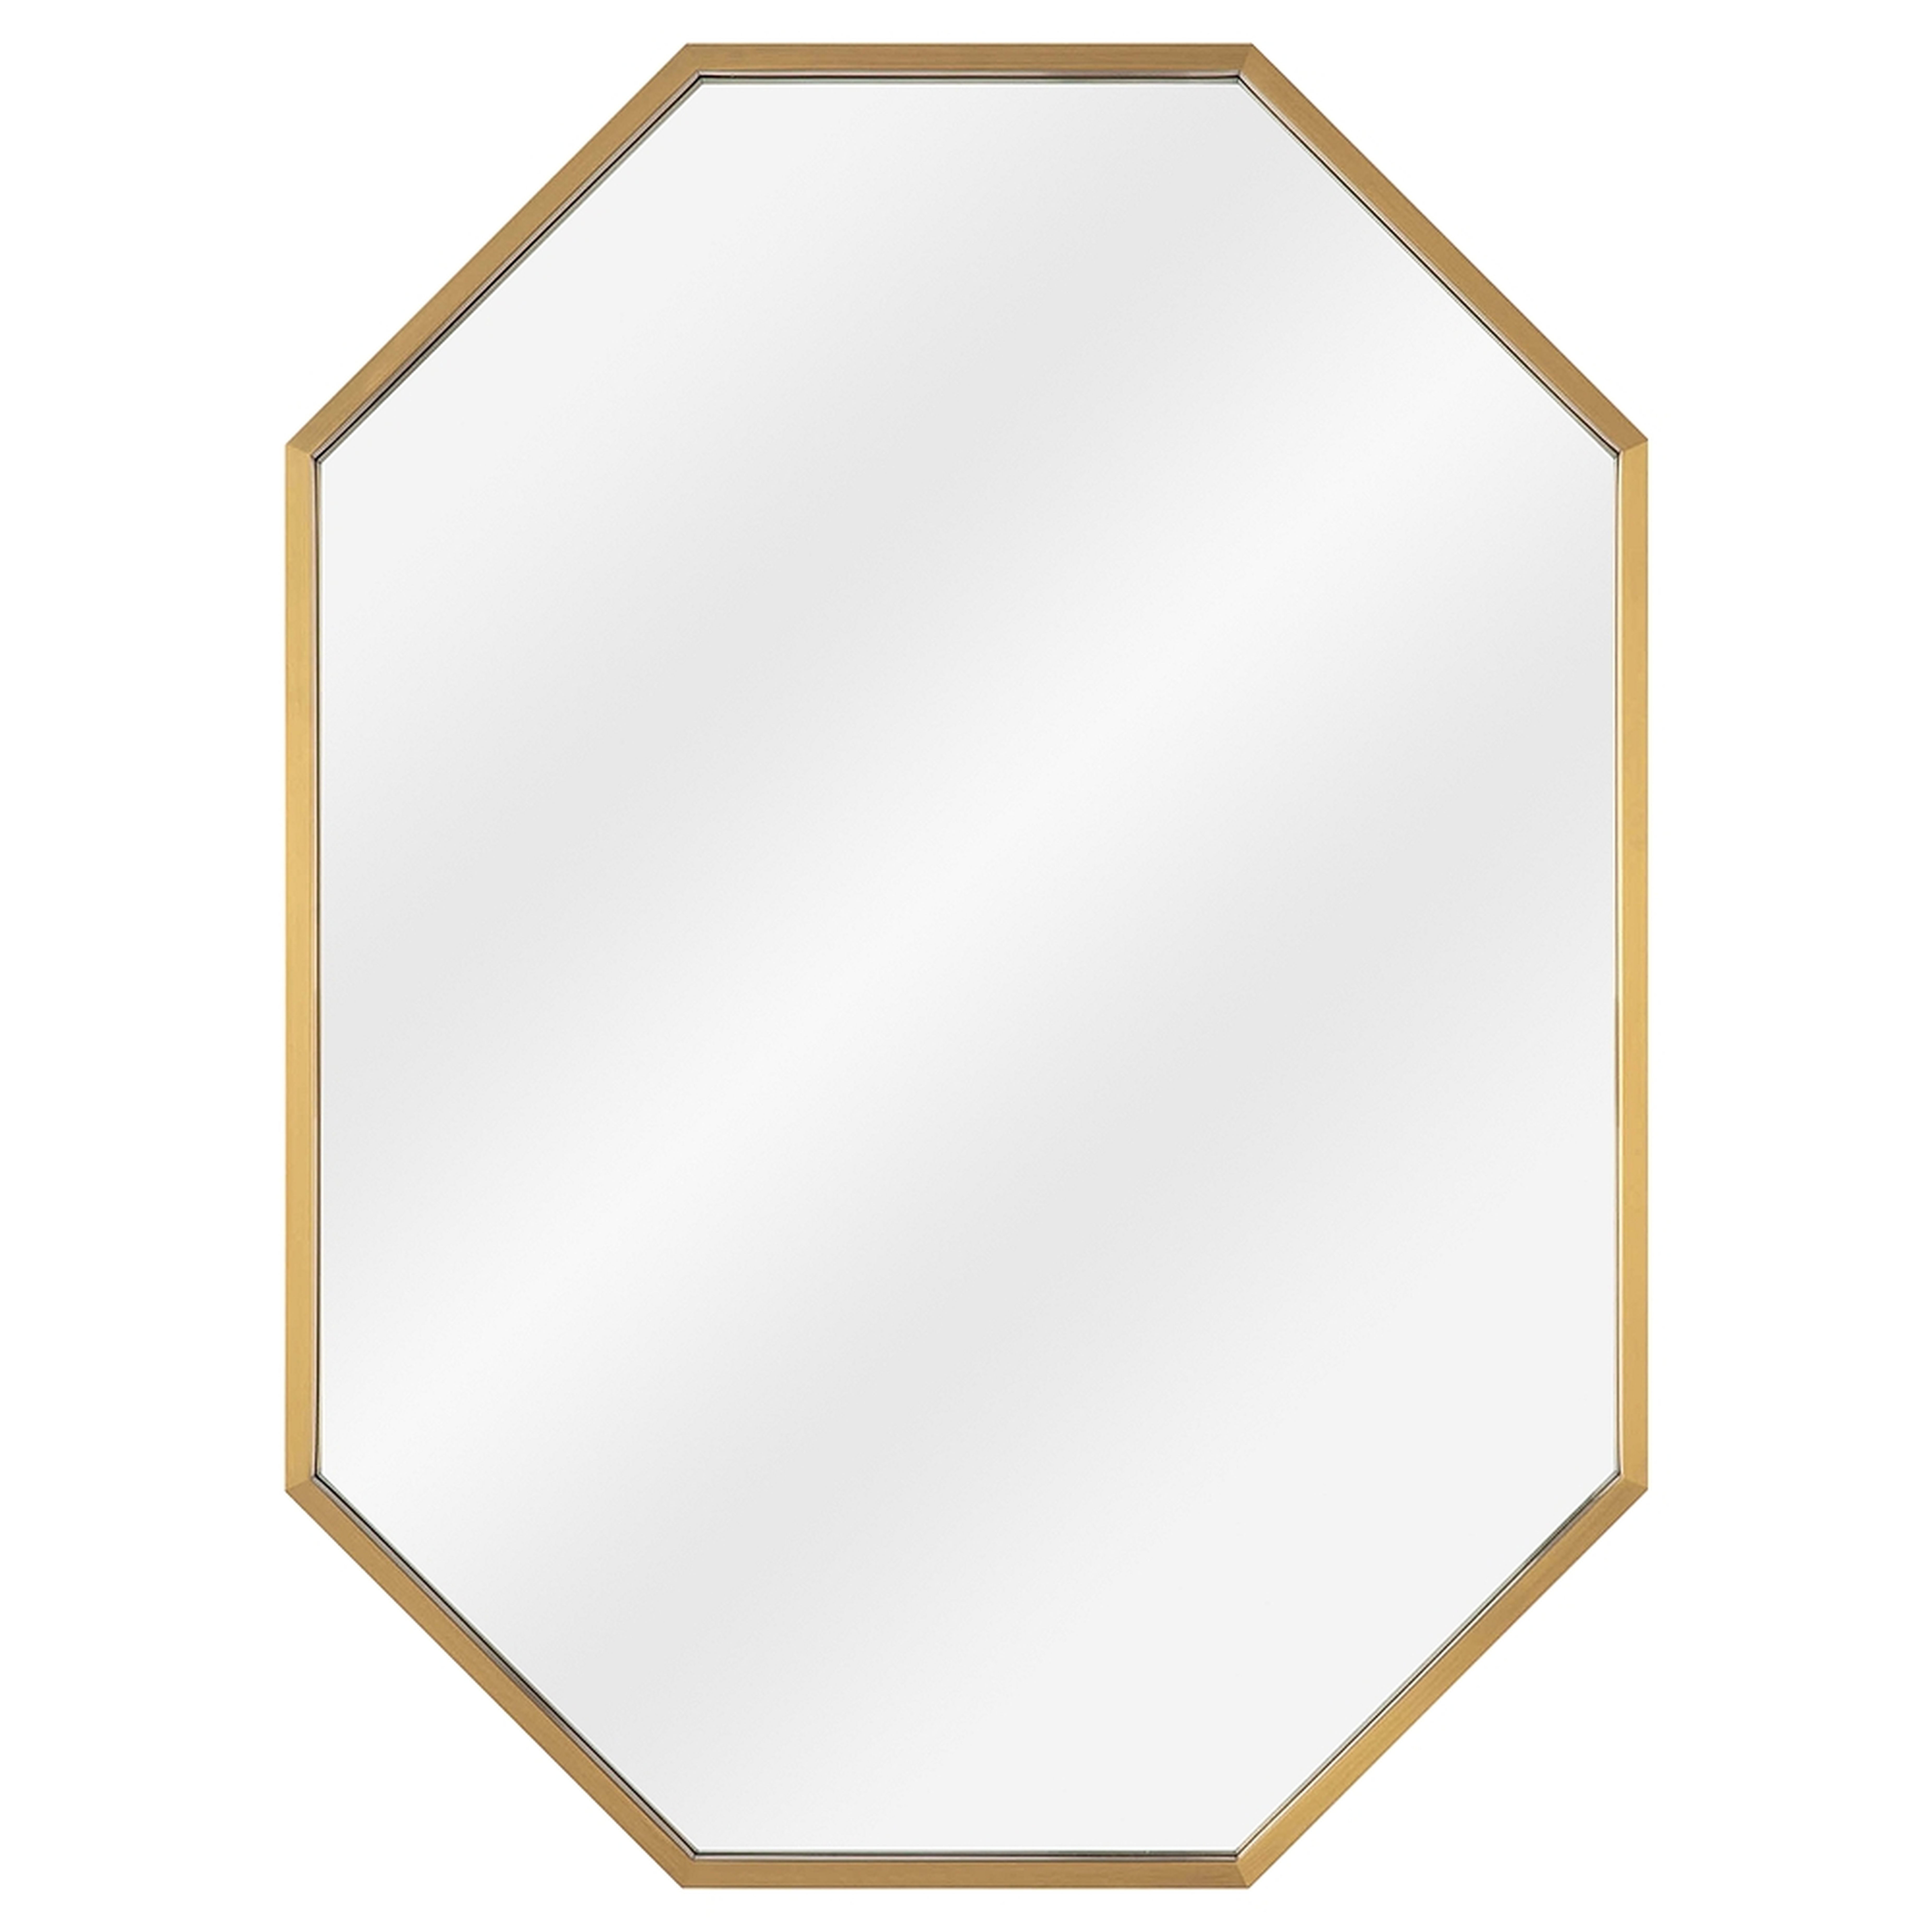 Classics Hale Natural Brass 24" x 32" Hexagon Wall Mirror - Style # 80W10 - Lamps Plus